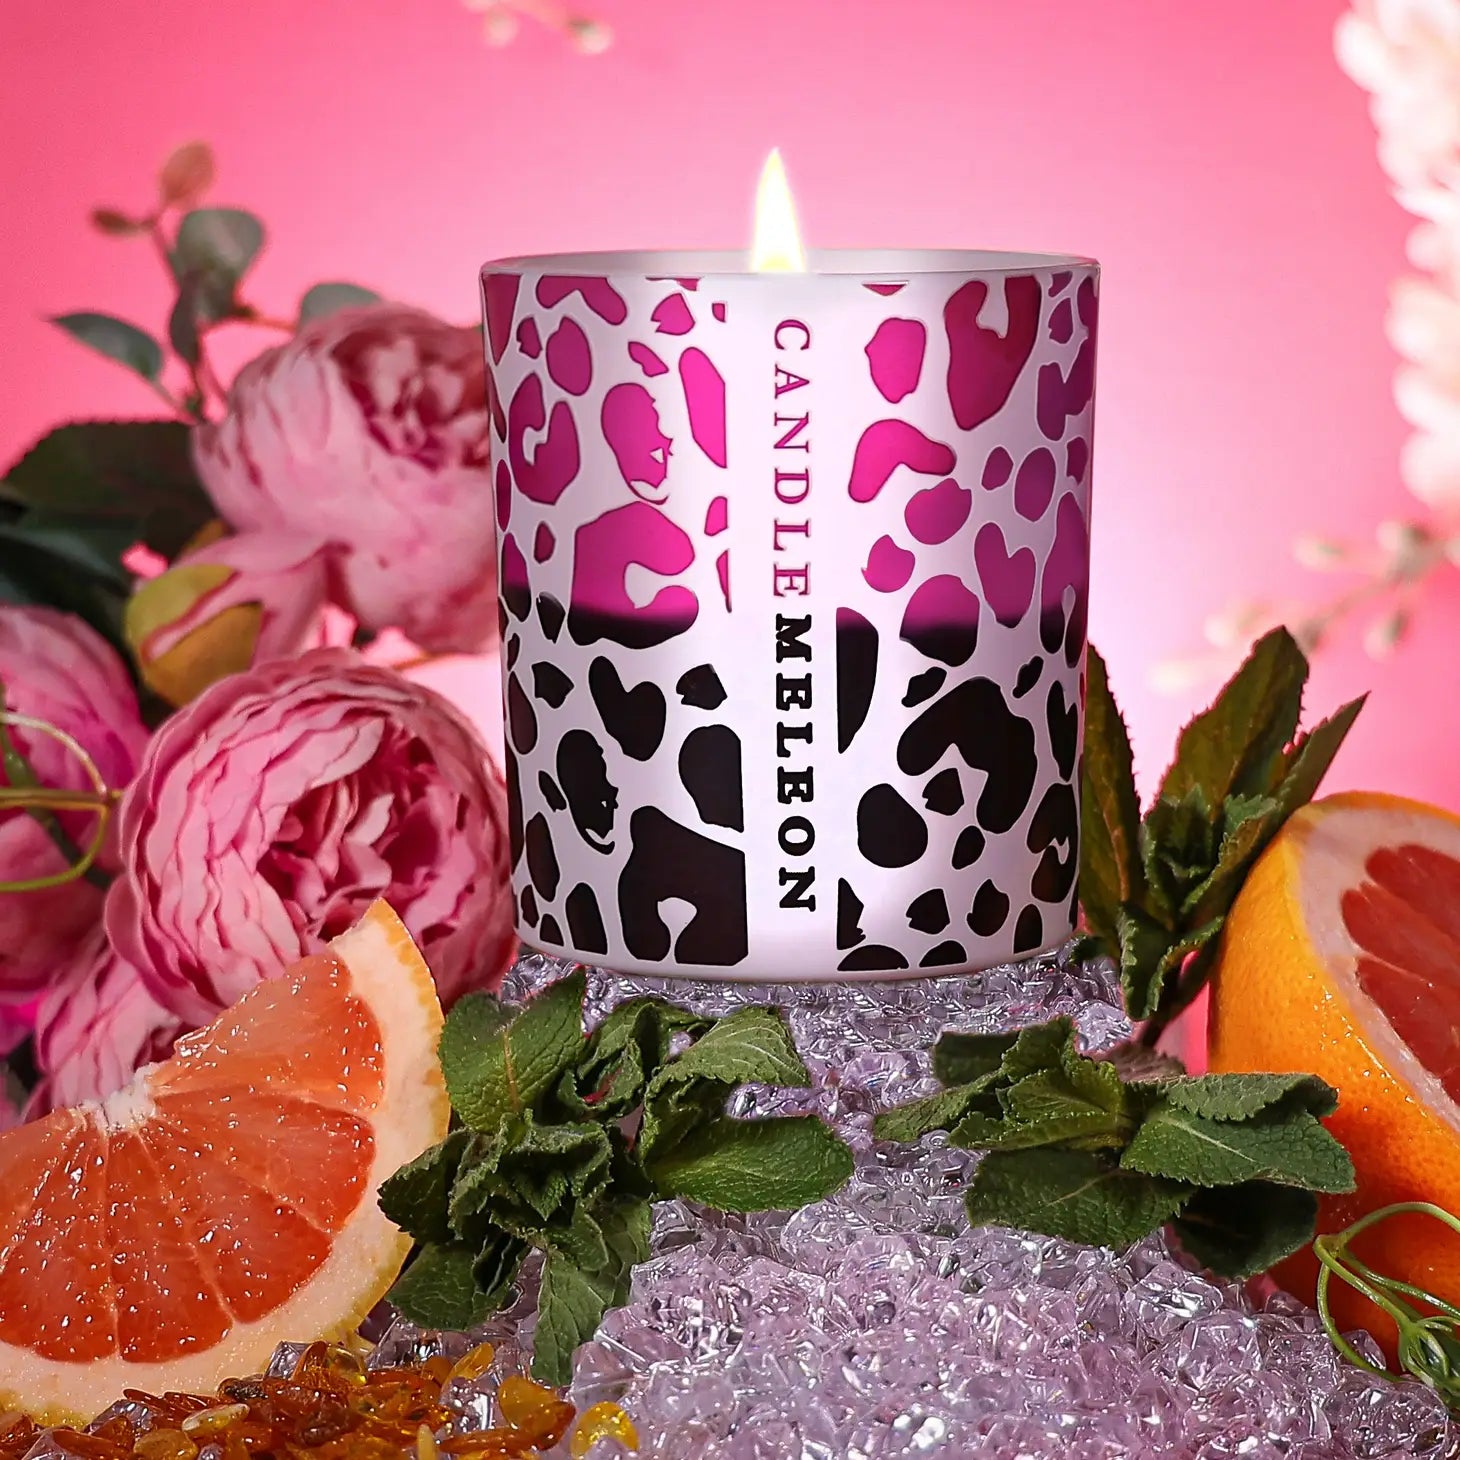 Candlemeleon Pink Leopard Woodenwick Soy Wax Candle at Joetie Home Fragrance. Luxury Handmade Apothecary Soy Candles